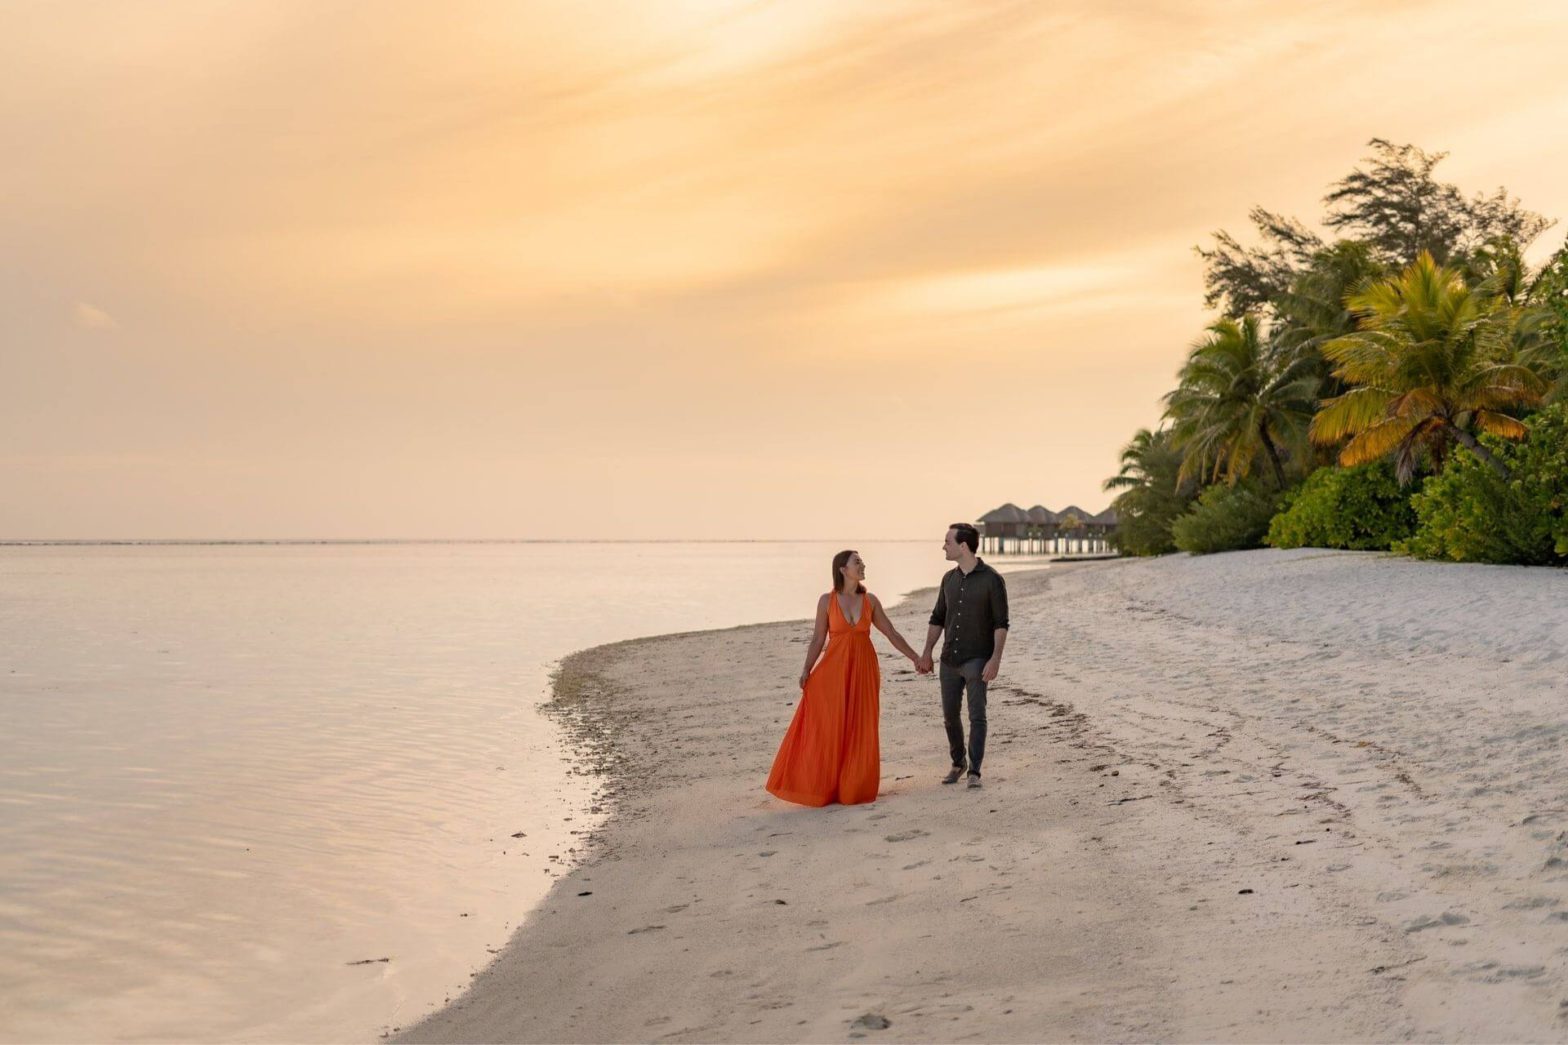 Maldives Honeymoon Packages from Surat for Couple - All Inclusive Cost & Itinerary